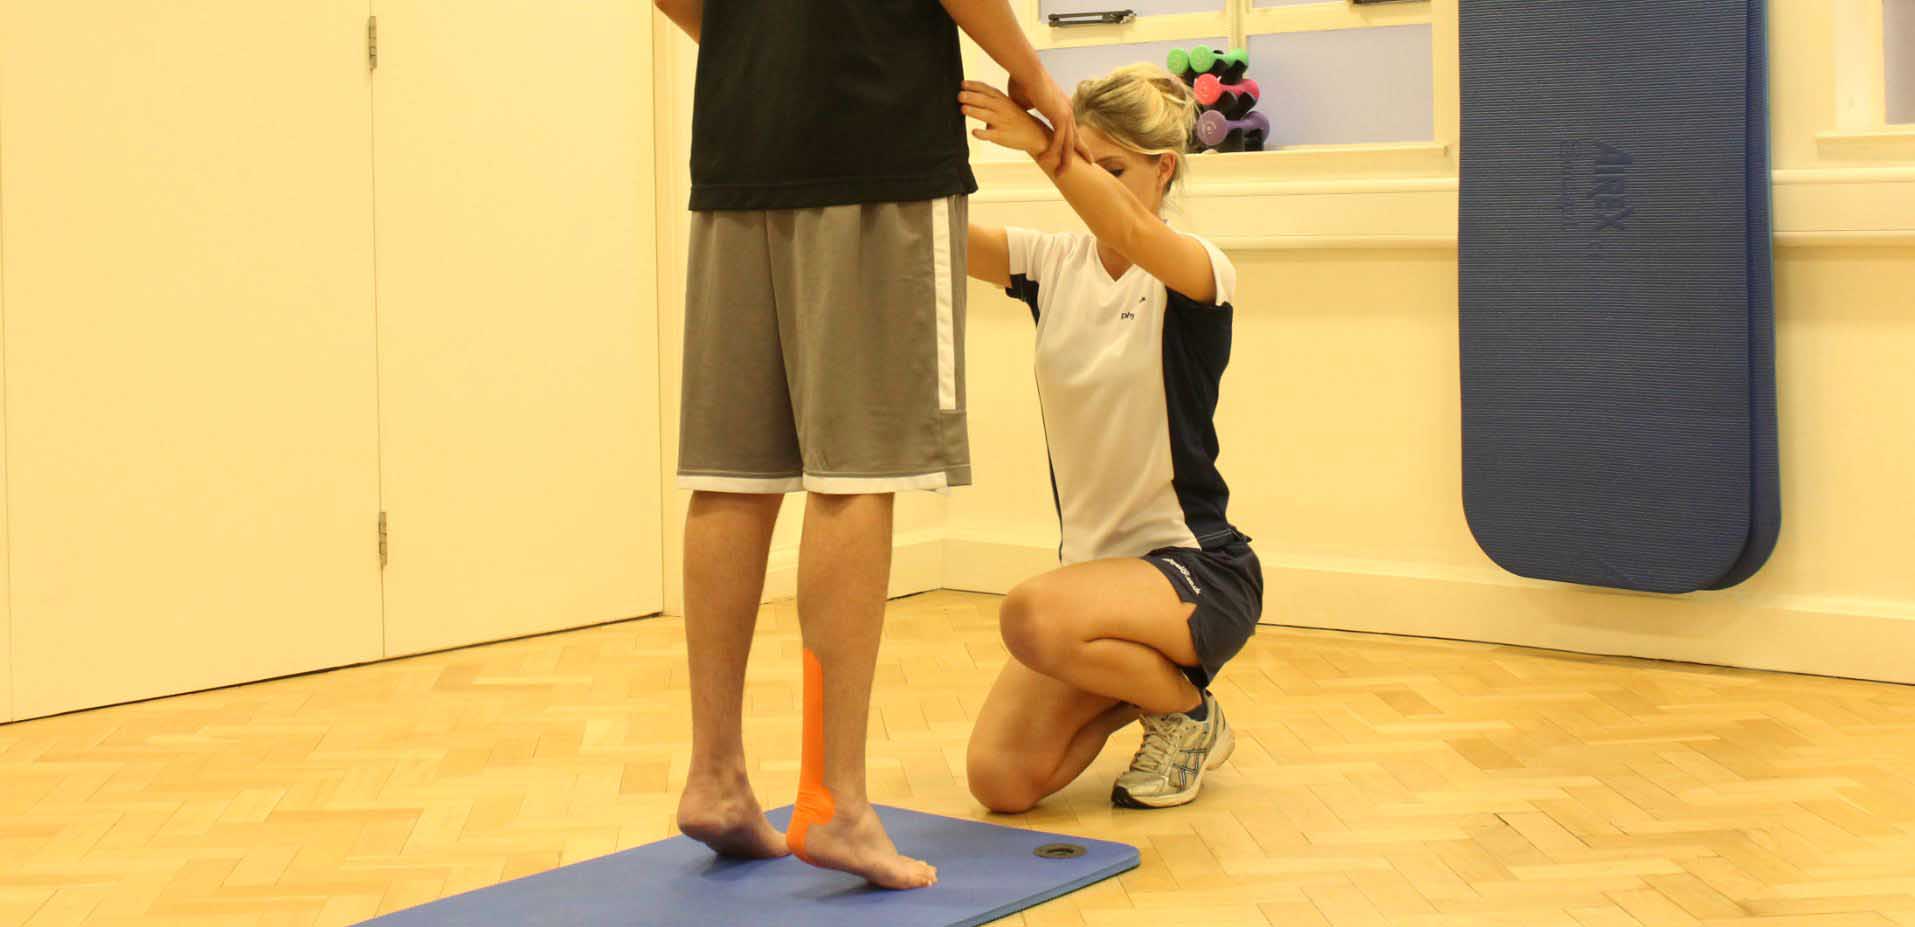 Supportive tape applied to ankle by experienced therapist